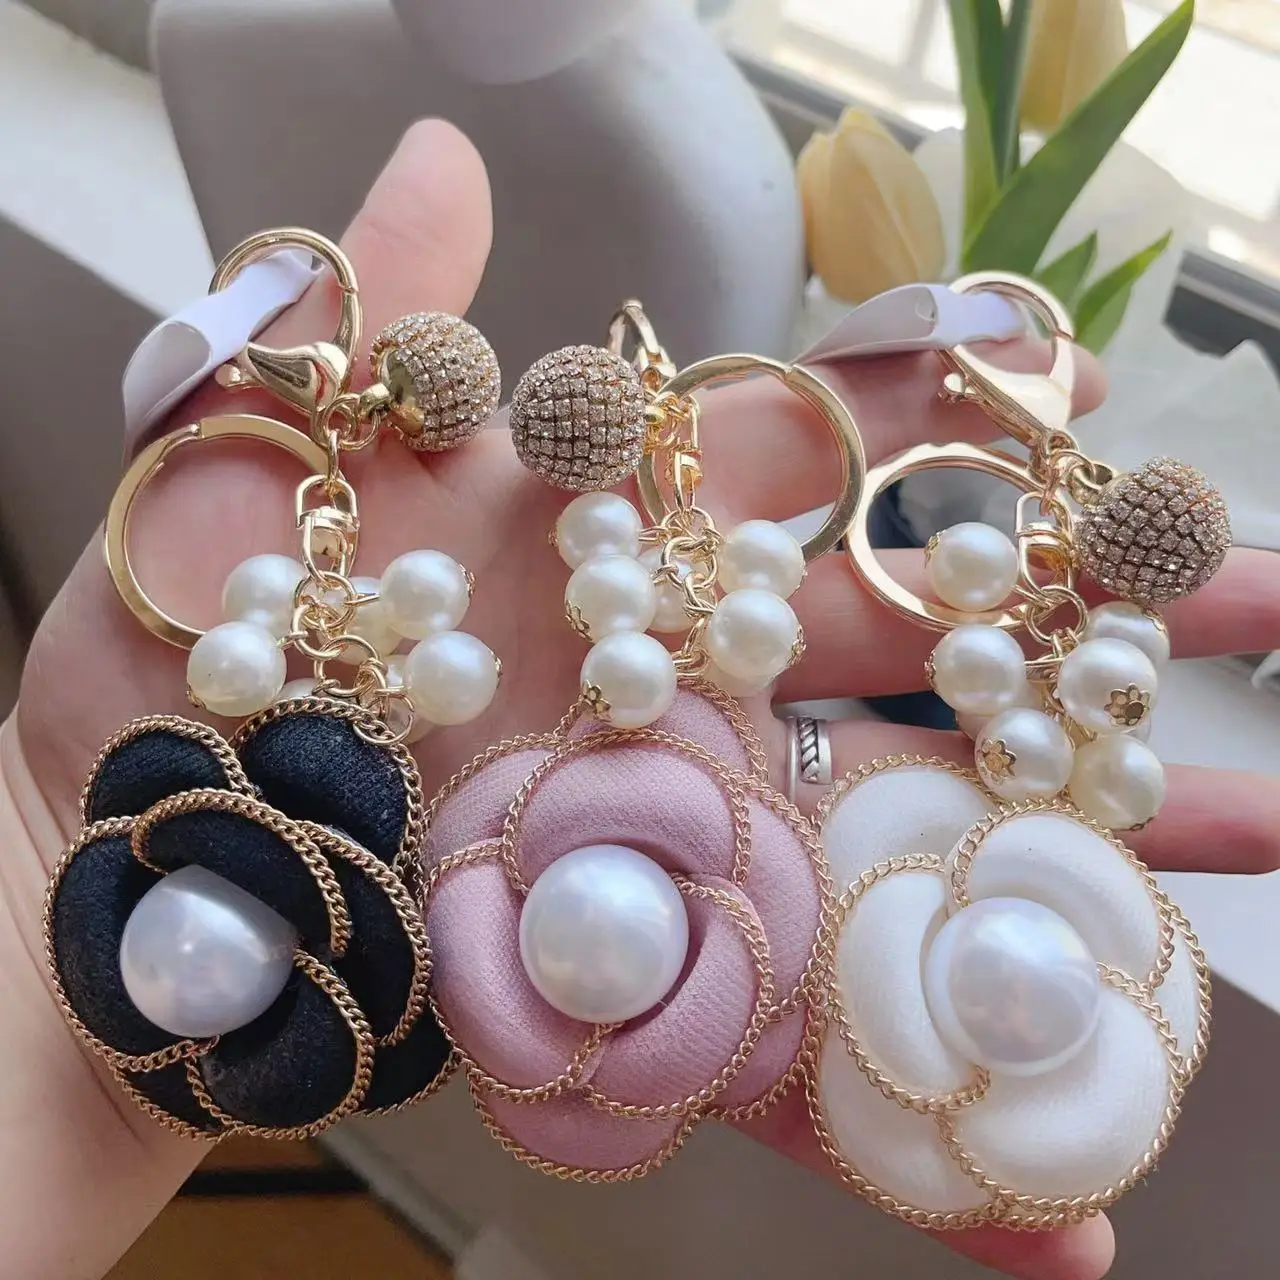 

Boutique French Fragrant Breeze Pearl Perfume Chain Camellia Flower Keychain Car Key Bag Charm Women Girl Keyring Gift Jewelry